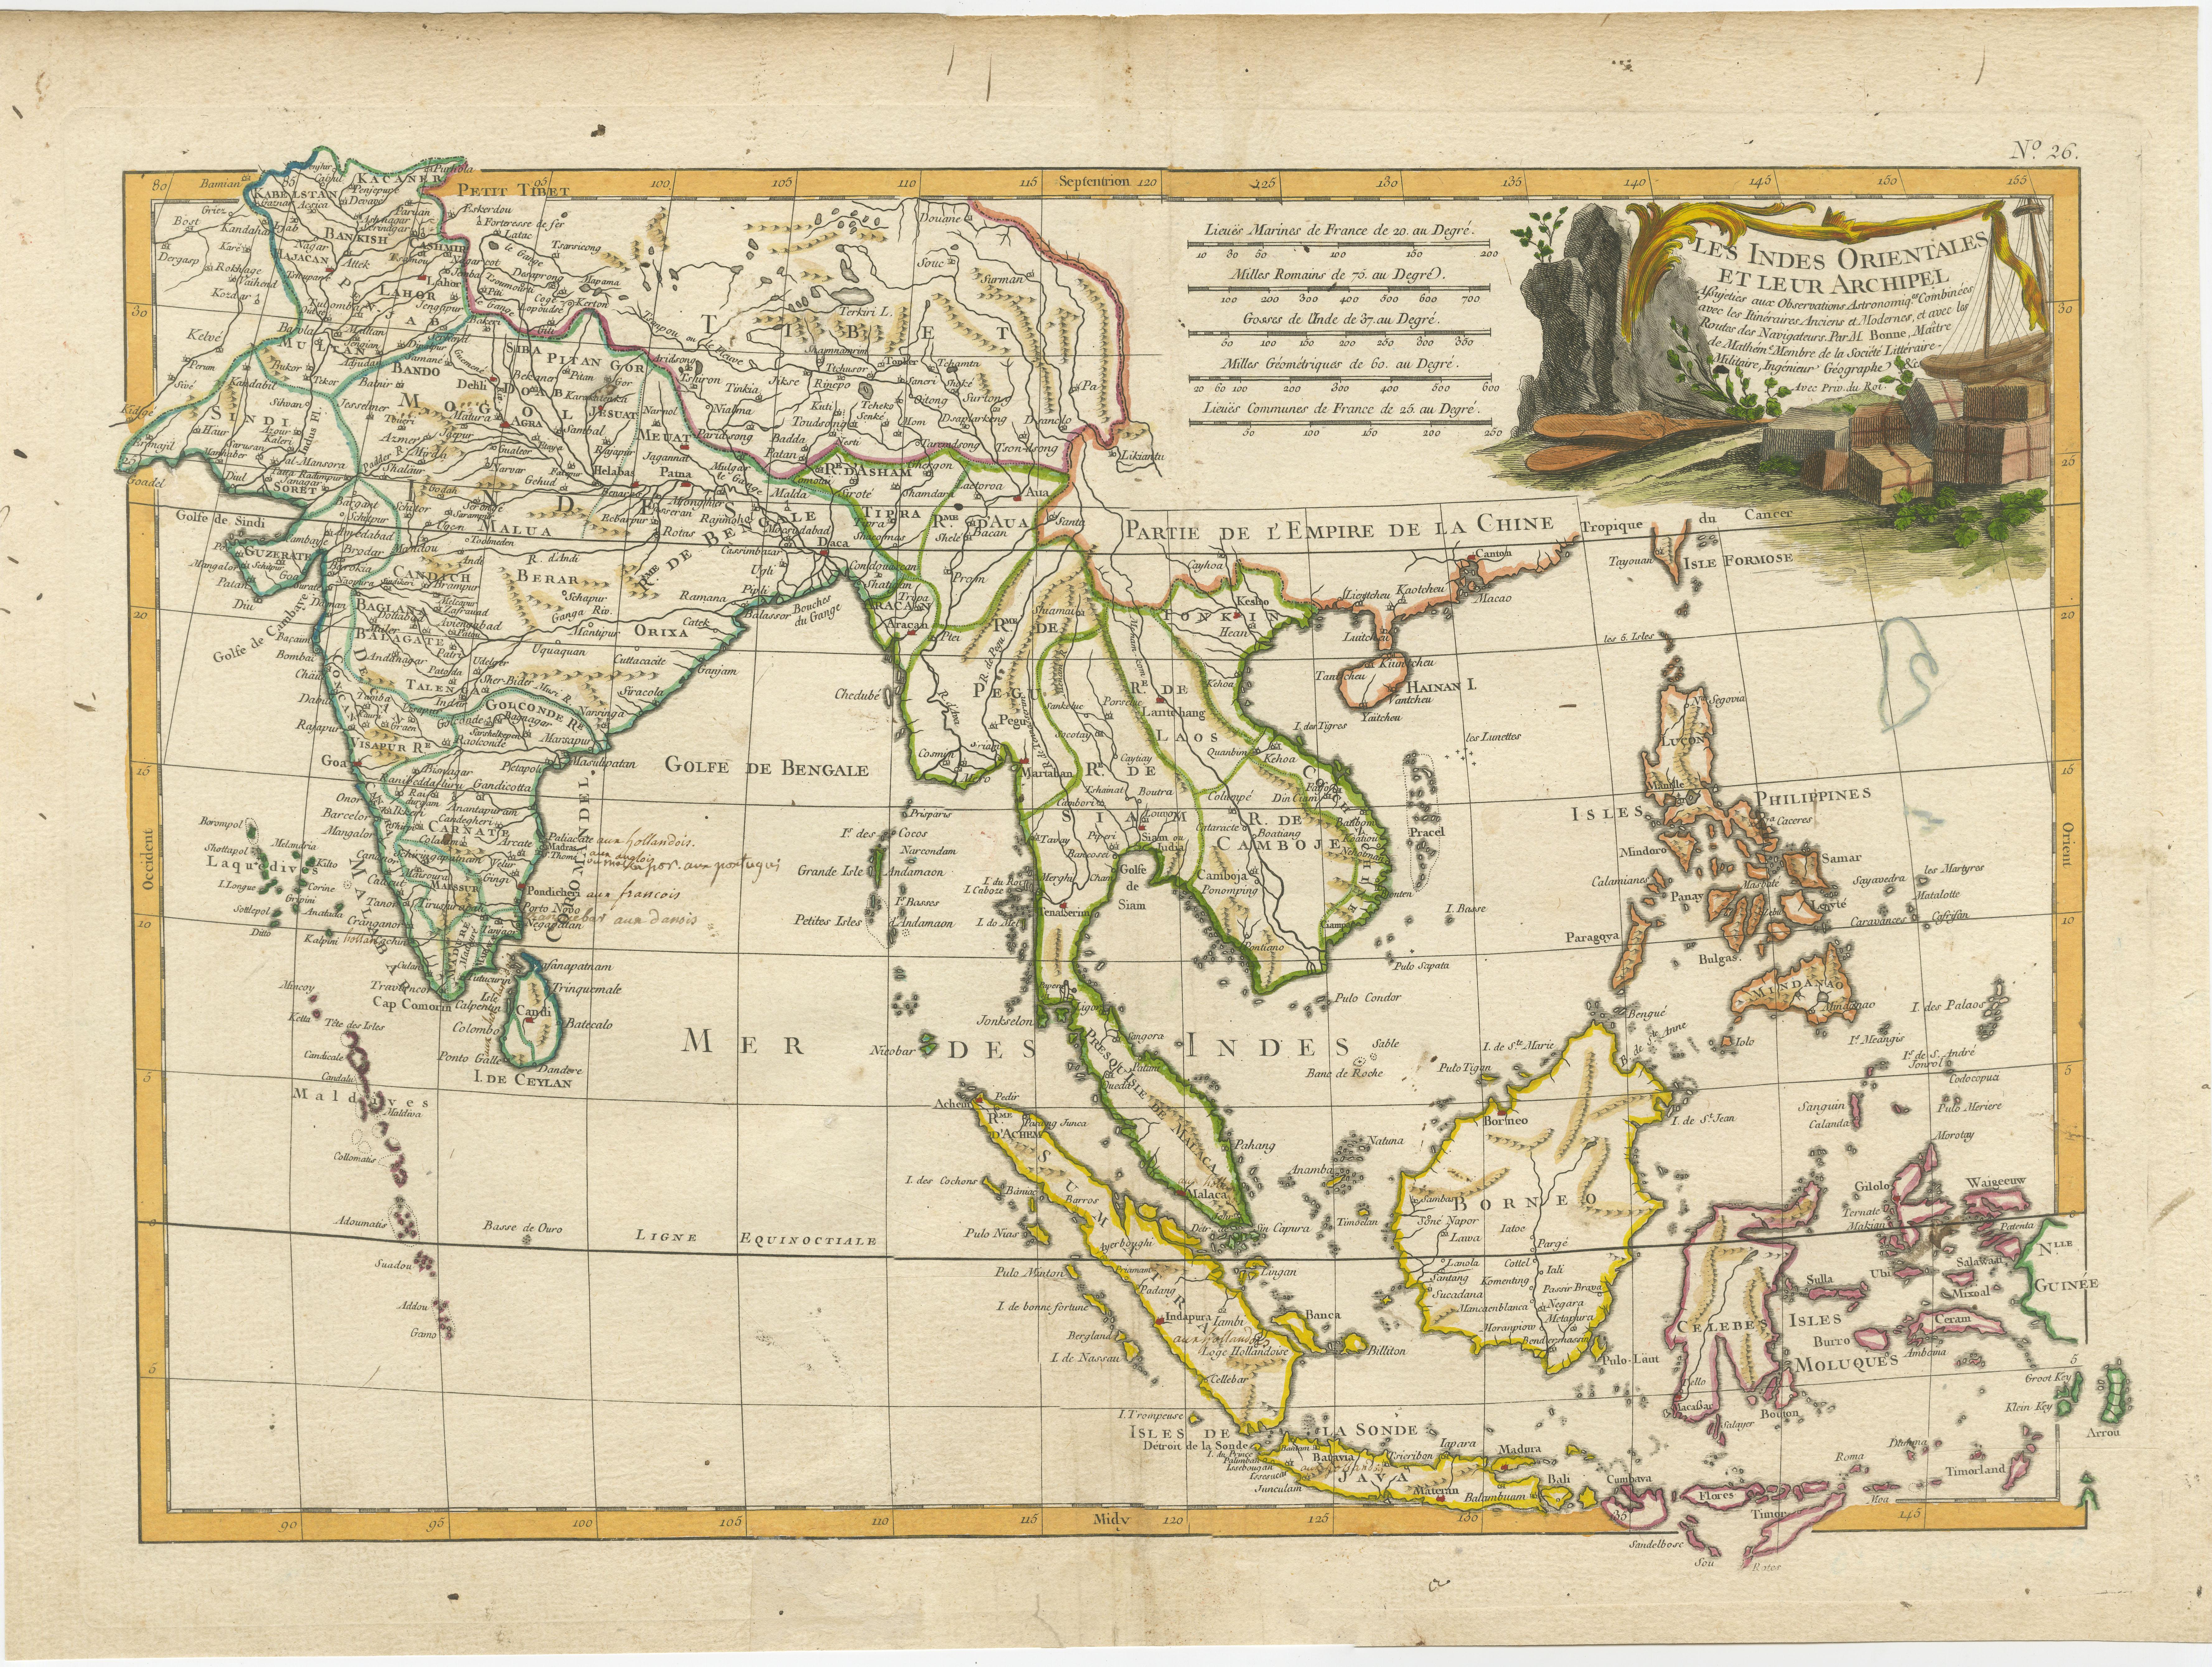 Antique map titled 'Les Indes Orientales et leur Archipel'. Old map of Southeast Asia, the Straits of Malaca, Philippines, Sumatra, Java, India etc., extending north to Canton and Macao. Includes a decorative allegorical cartouche showing the region